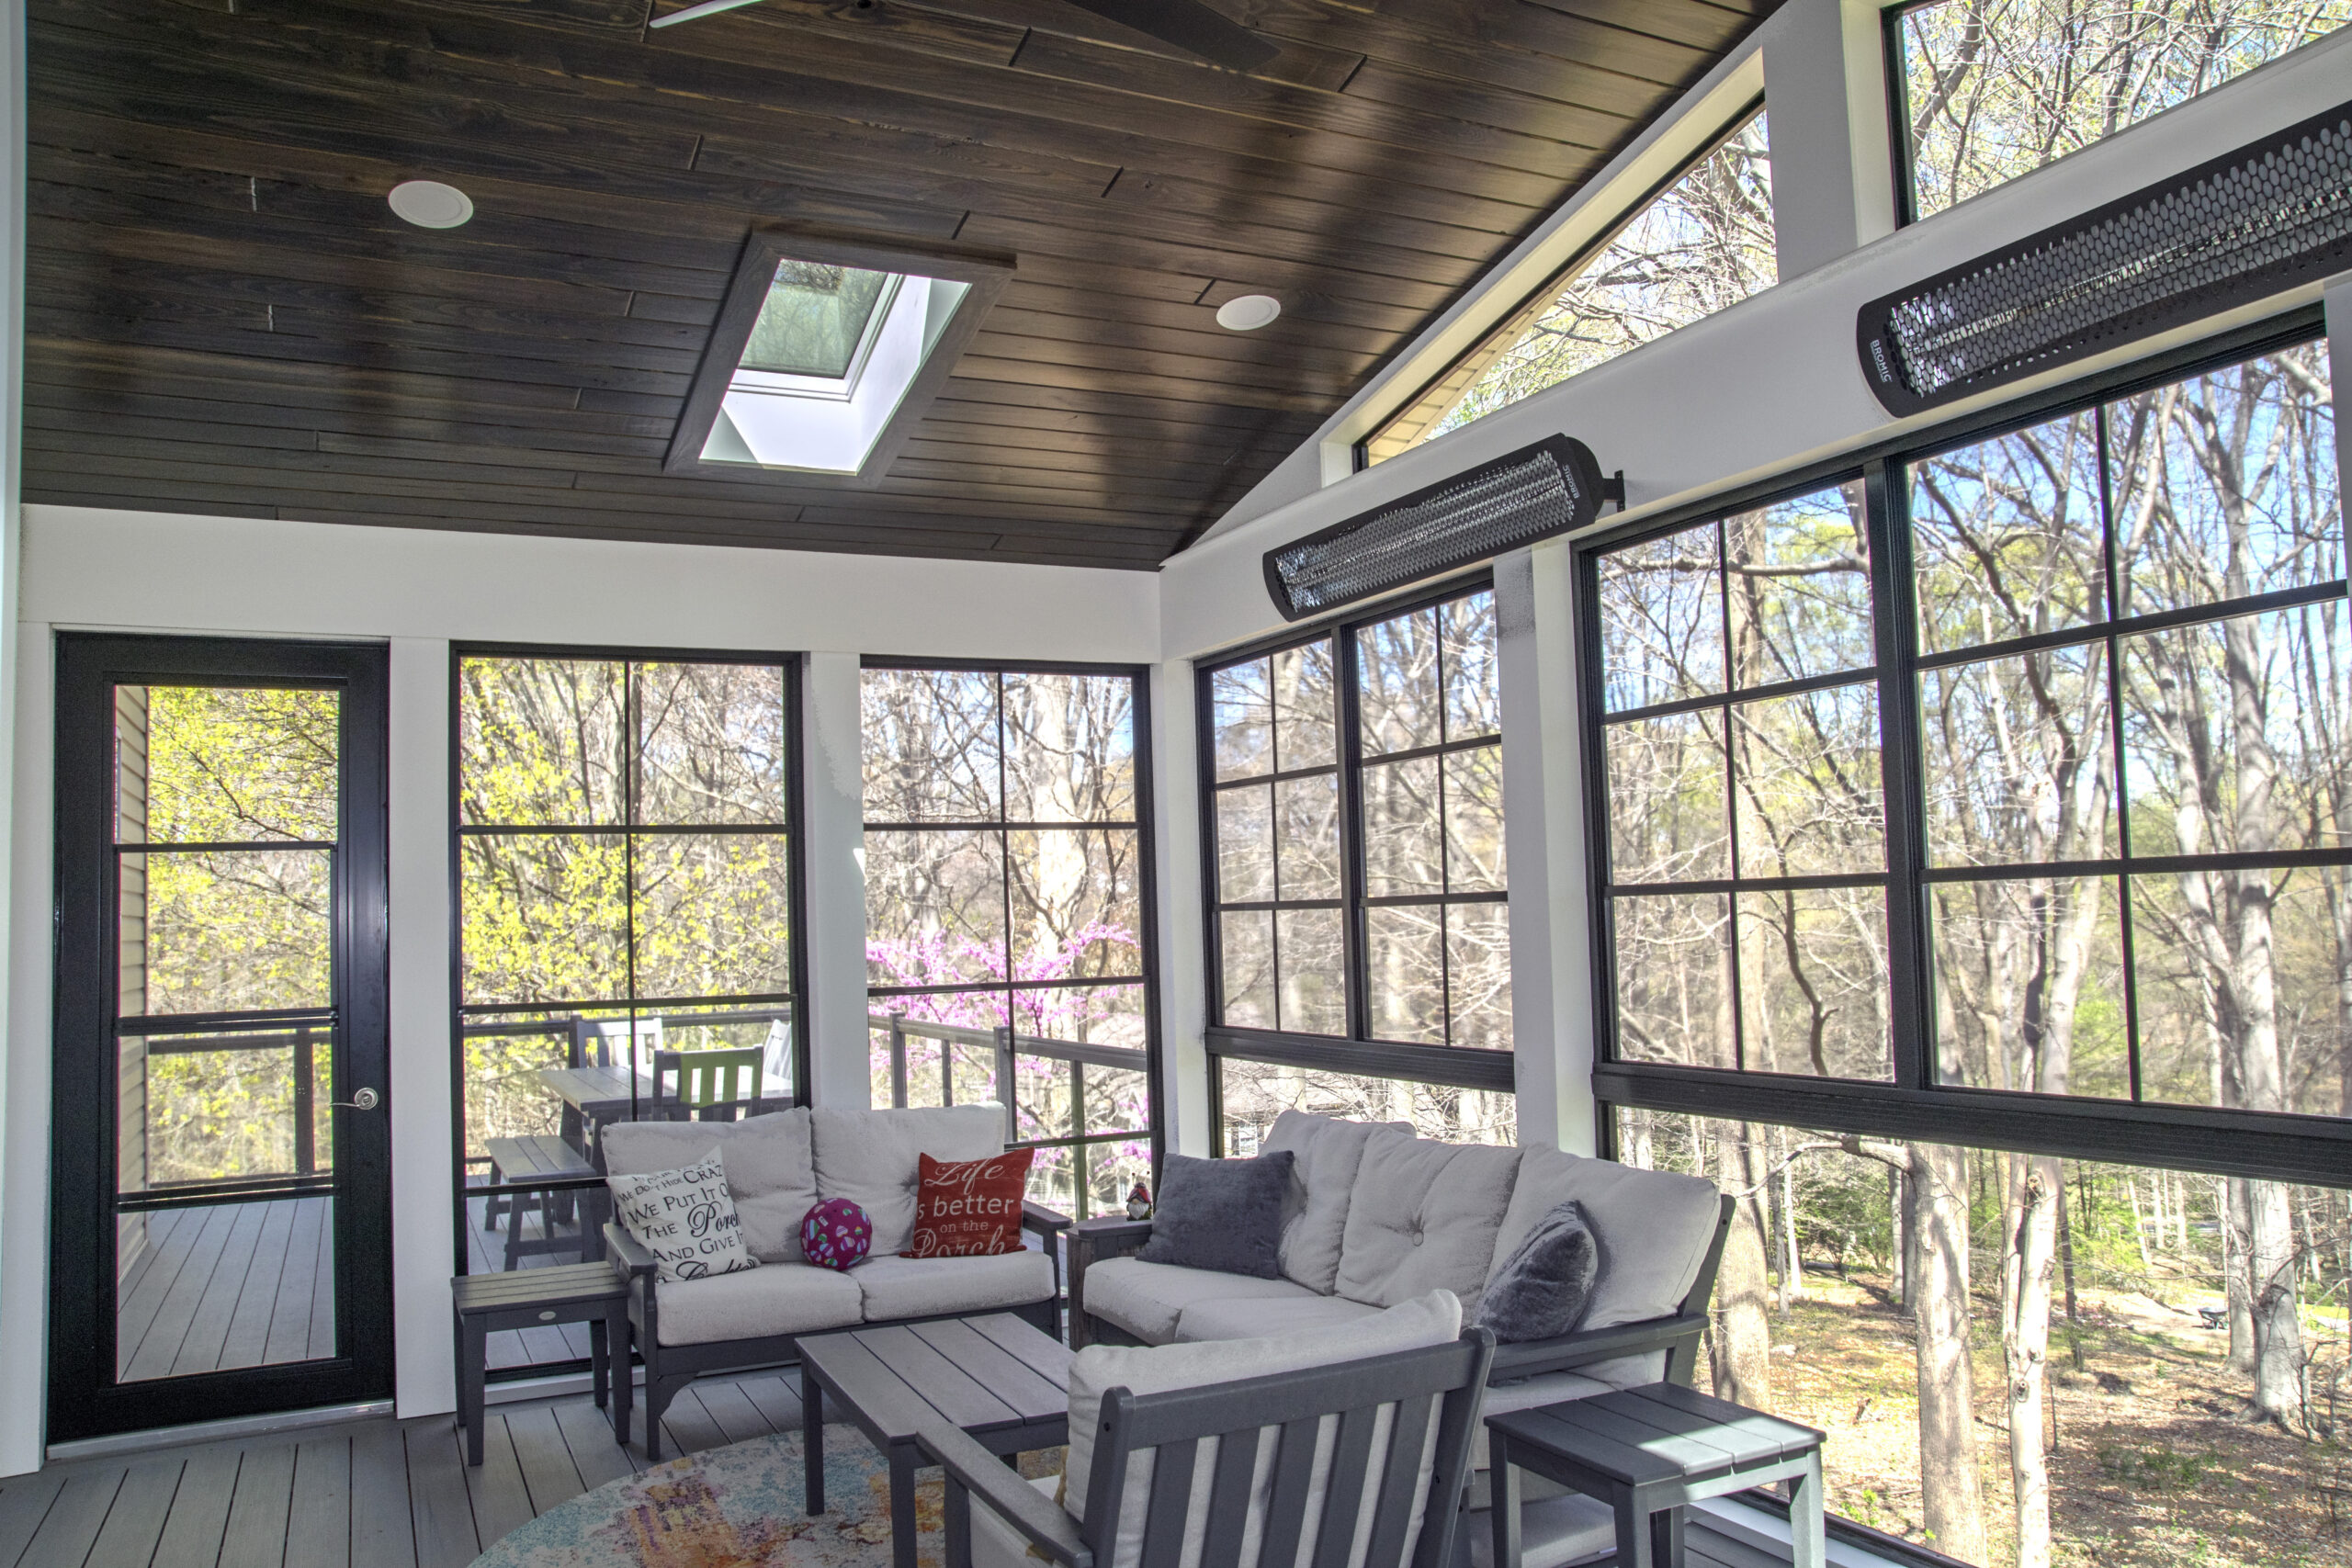 Covered porch with windows overlooking backyard